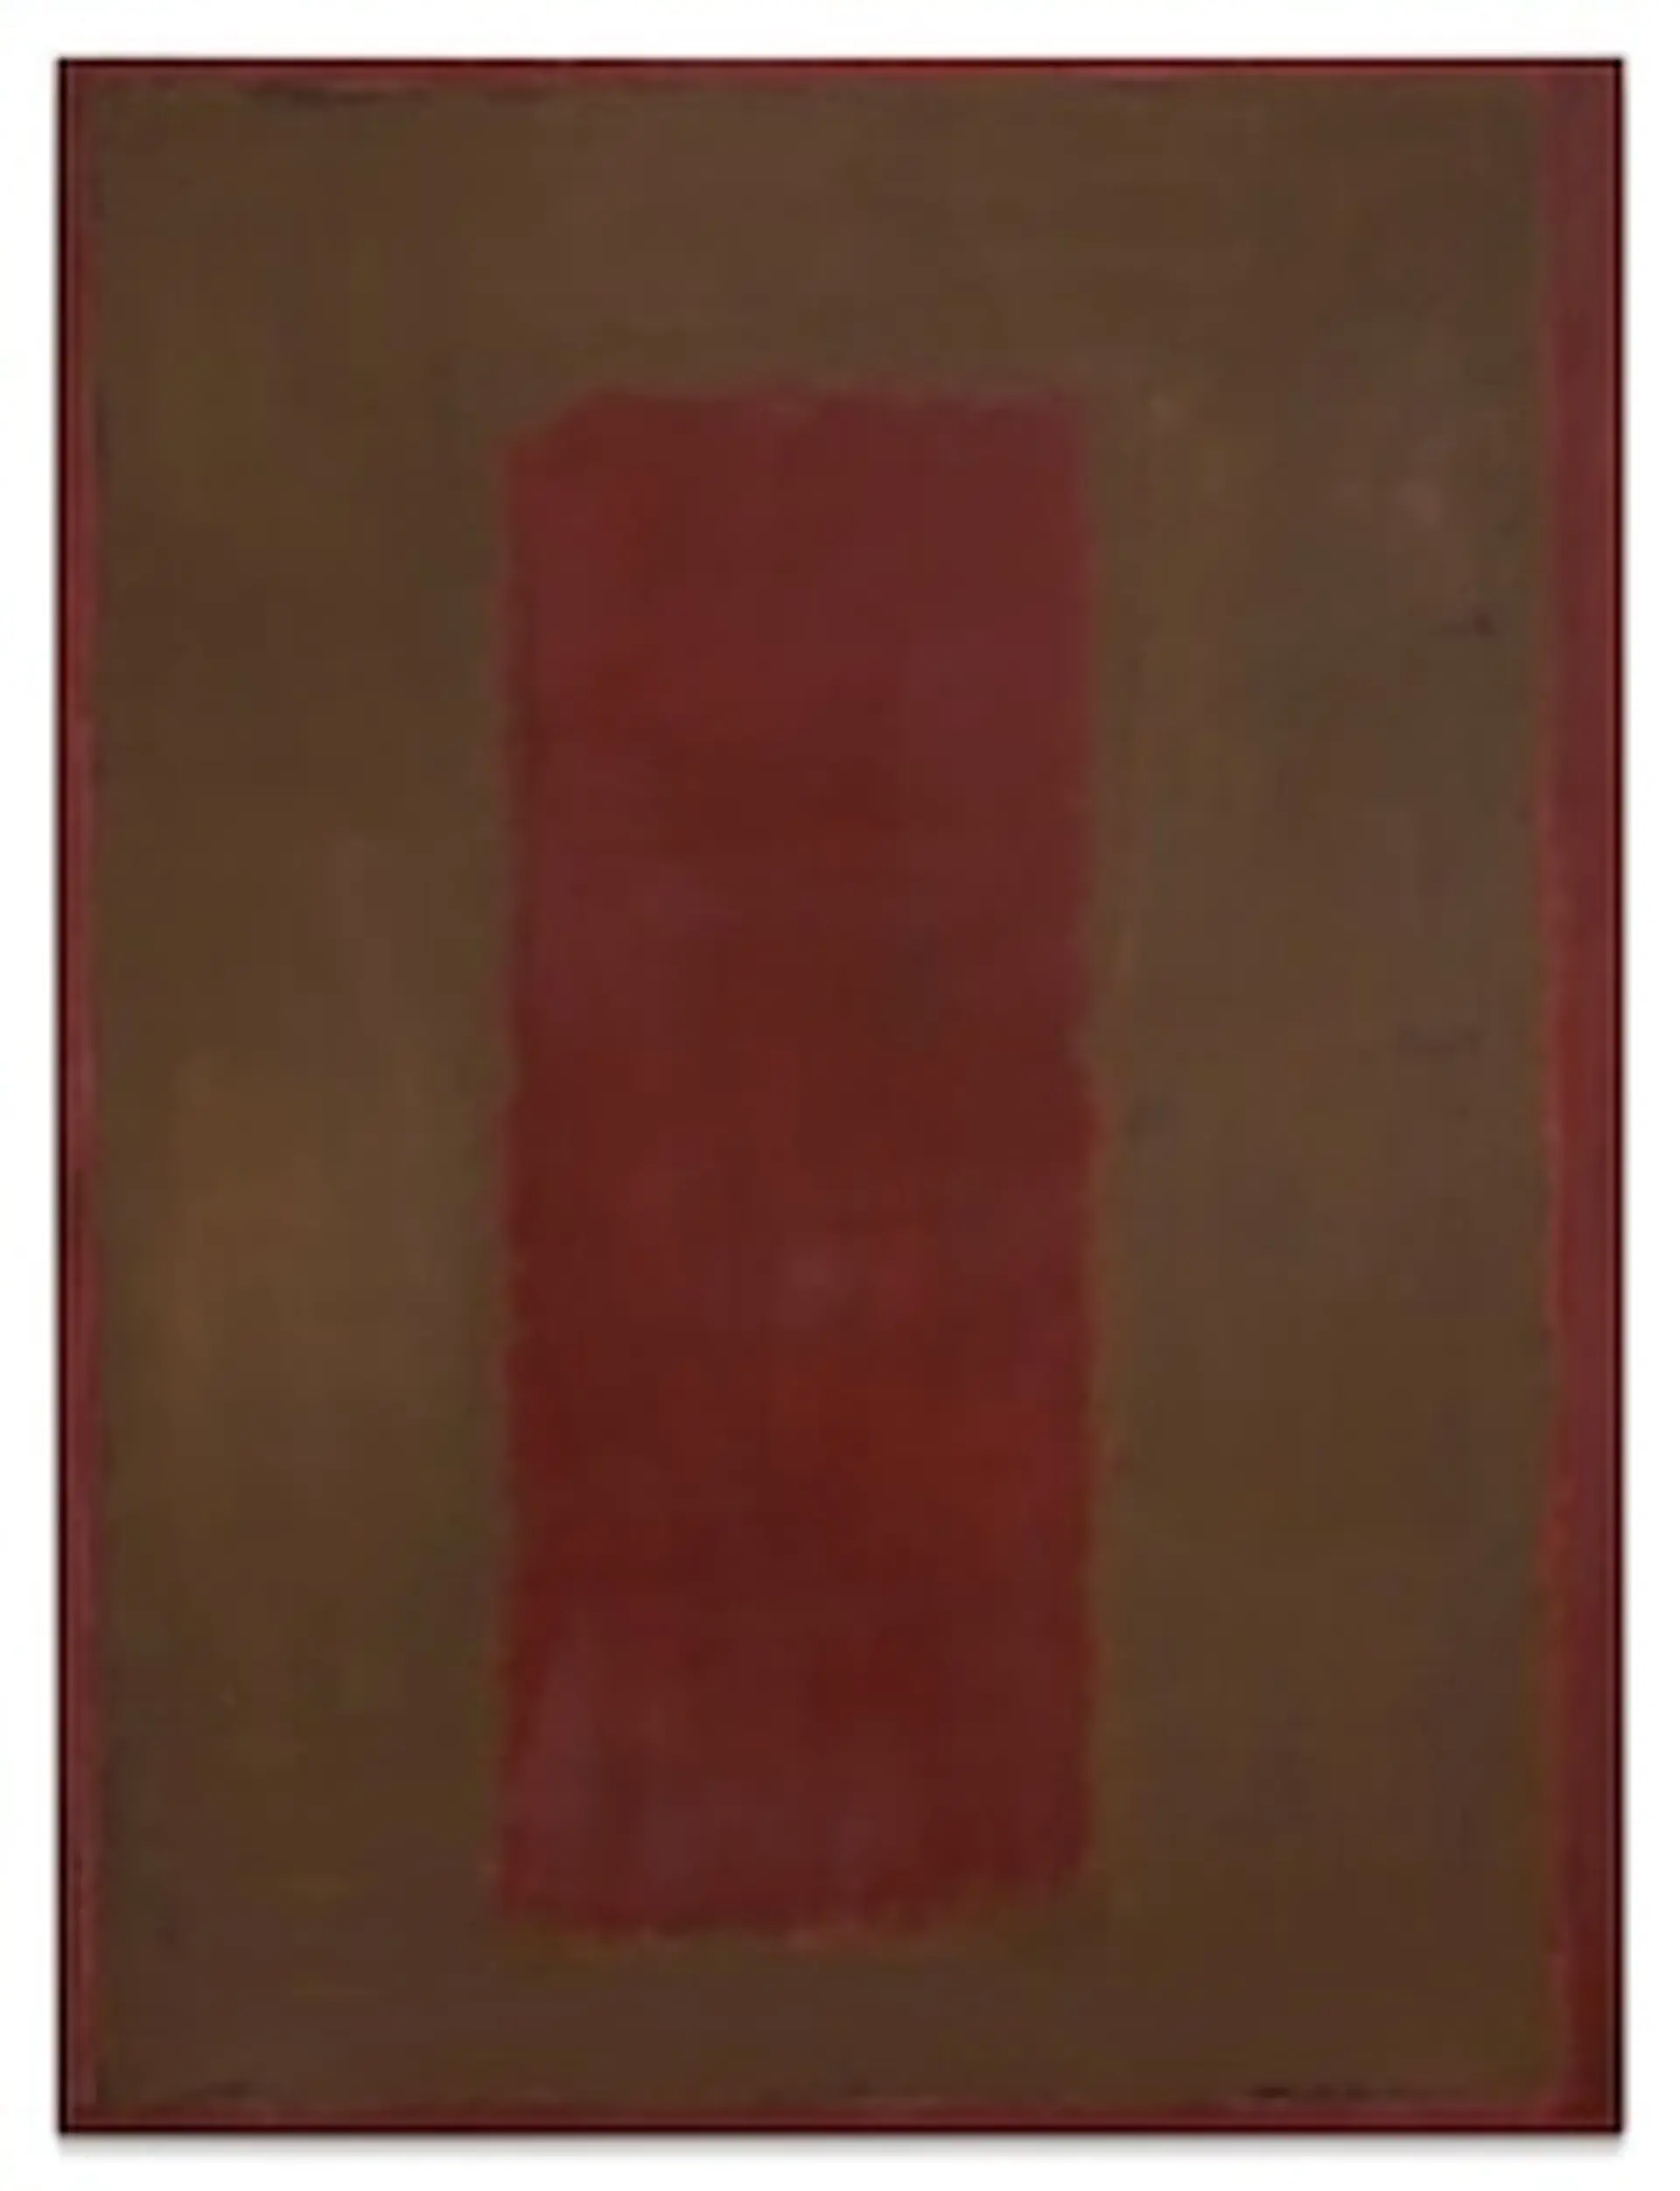 A large, rectangular shape painted on canvas in various tonalities of red. The larger rectangle is in a faded beige colour, while its surroundings and centre remain red.